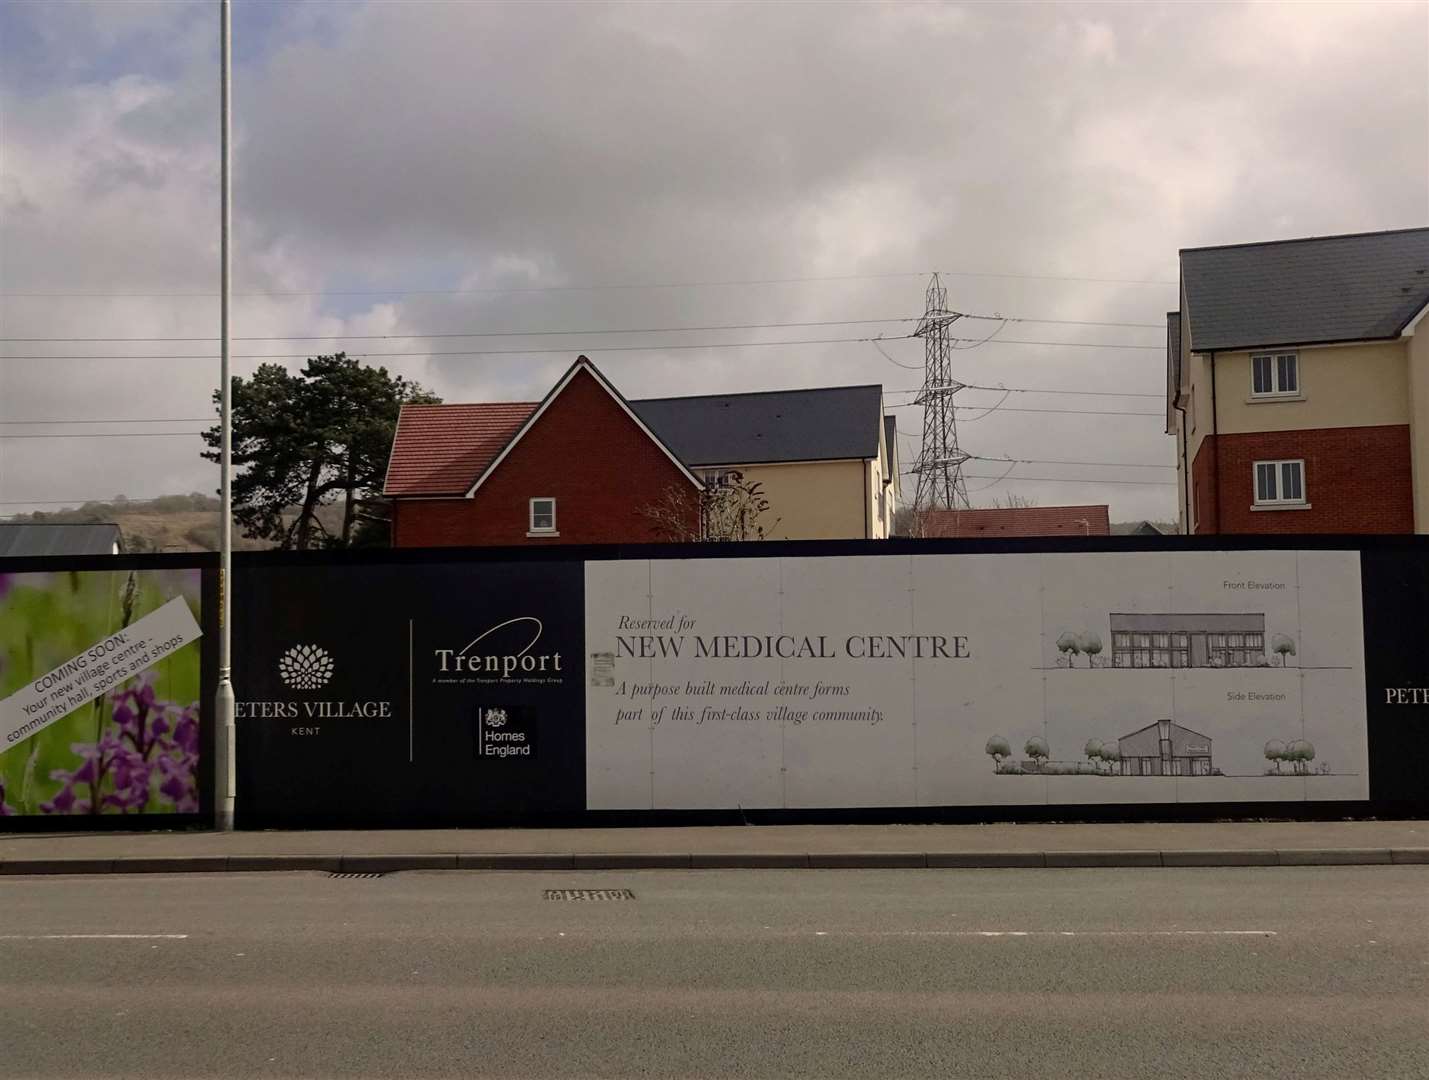 Hoardings around the site of the over-due medical centre